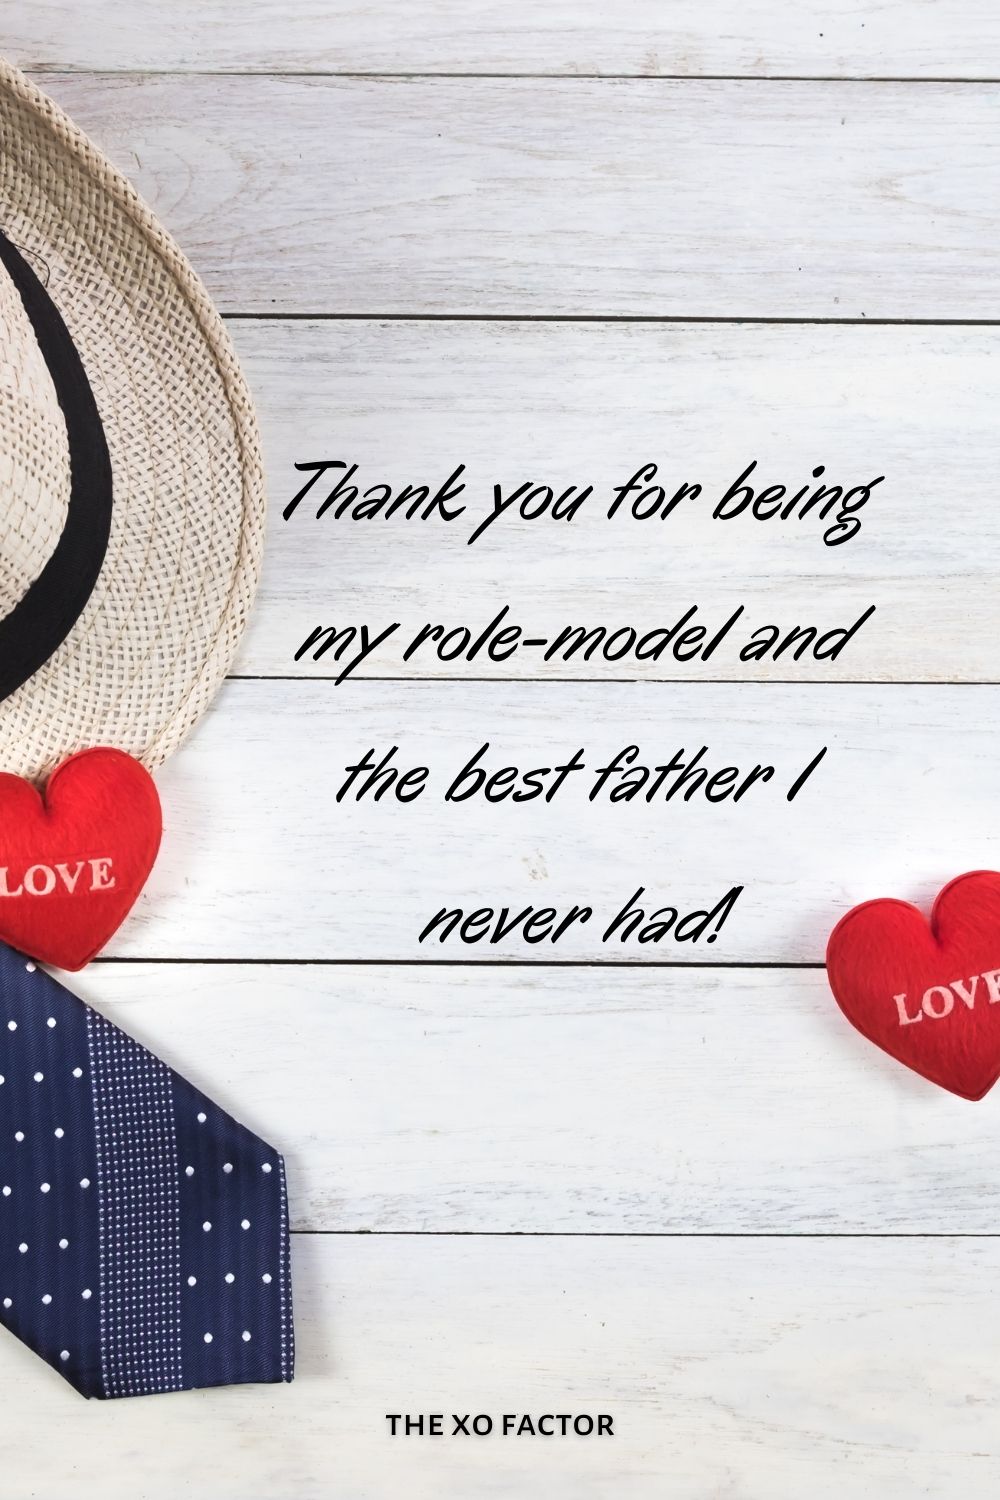 Thank you for being my role-model and the best father I never had!